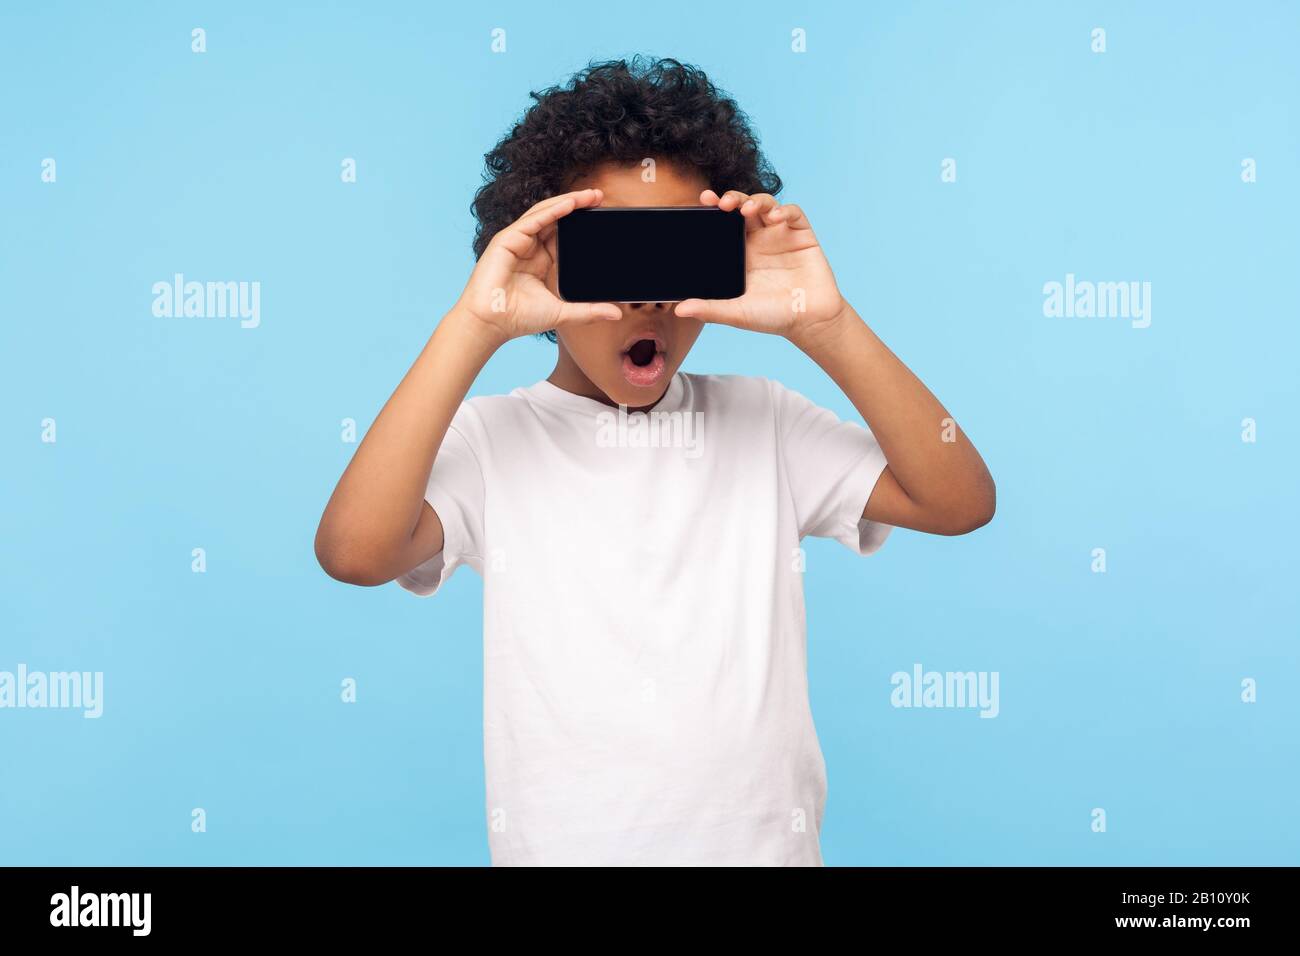 Funny amazed little mixed race boy covering eyes with cellphone, his mouth wide open from shock surprise, unknown child hiding face with mobile phone, Stock Photo